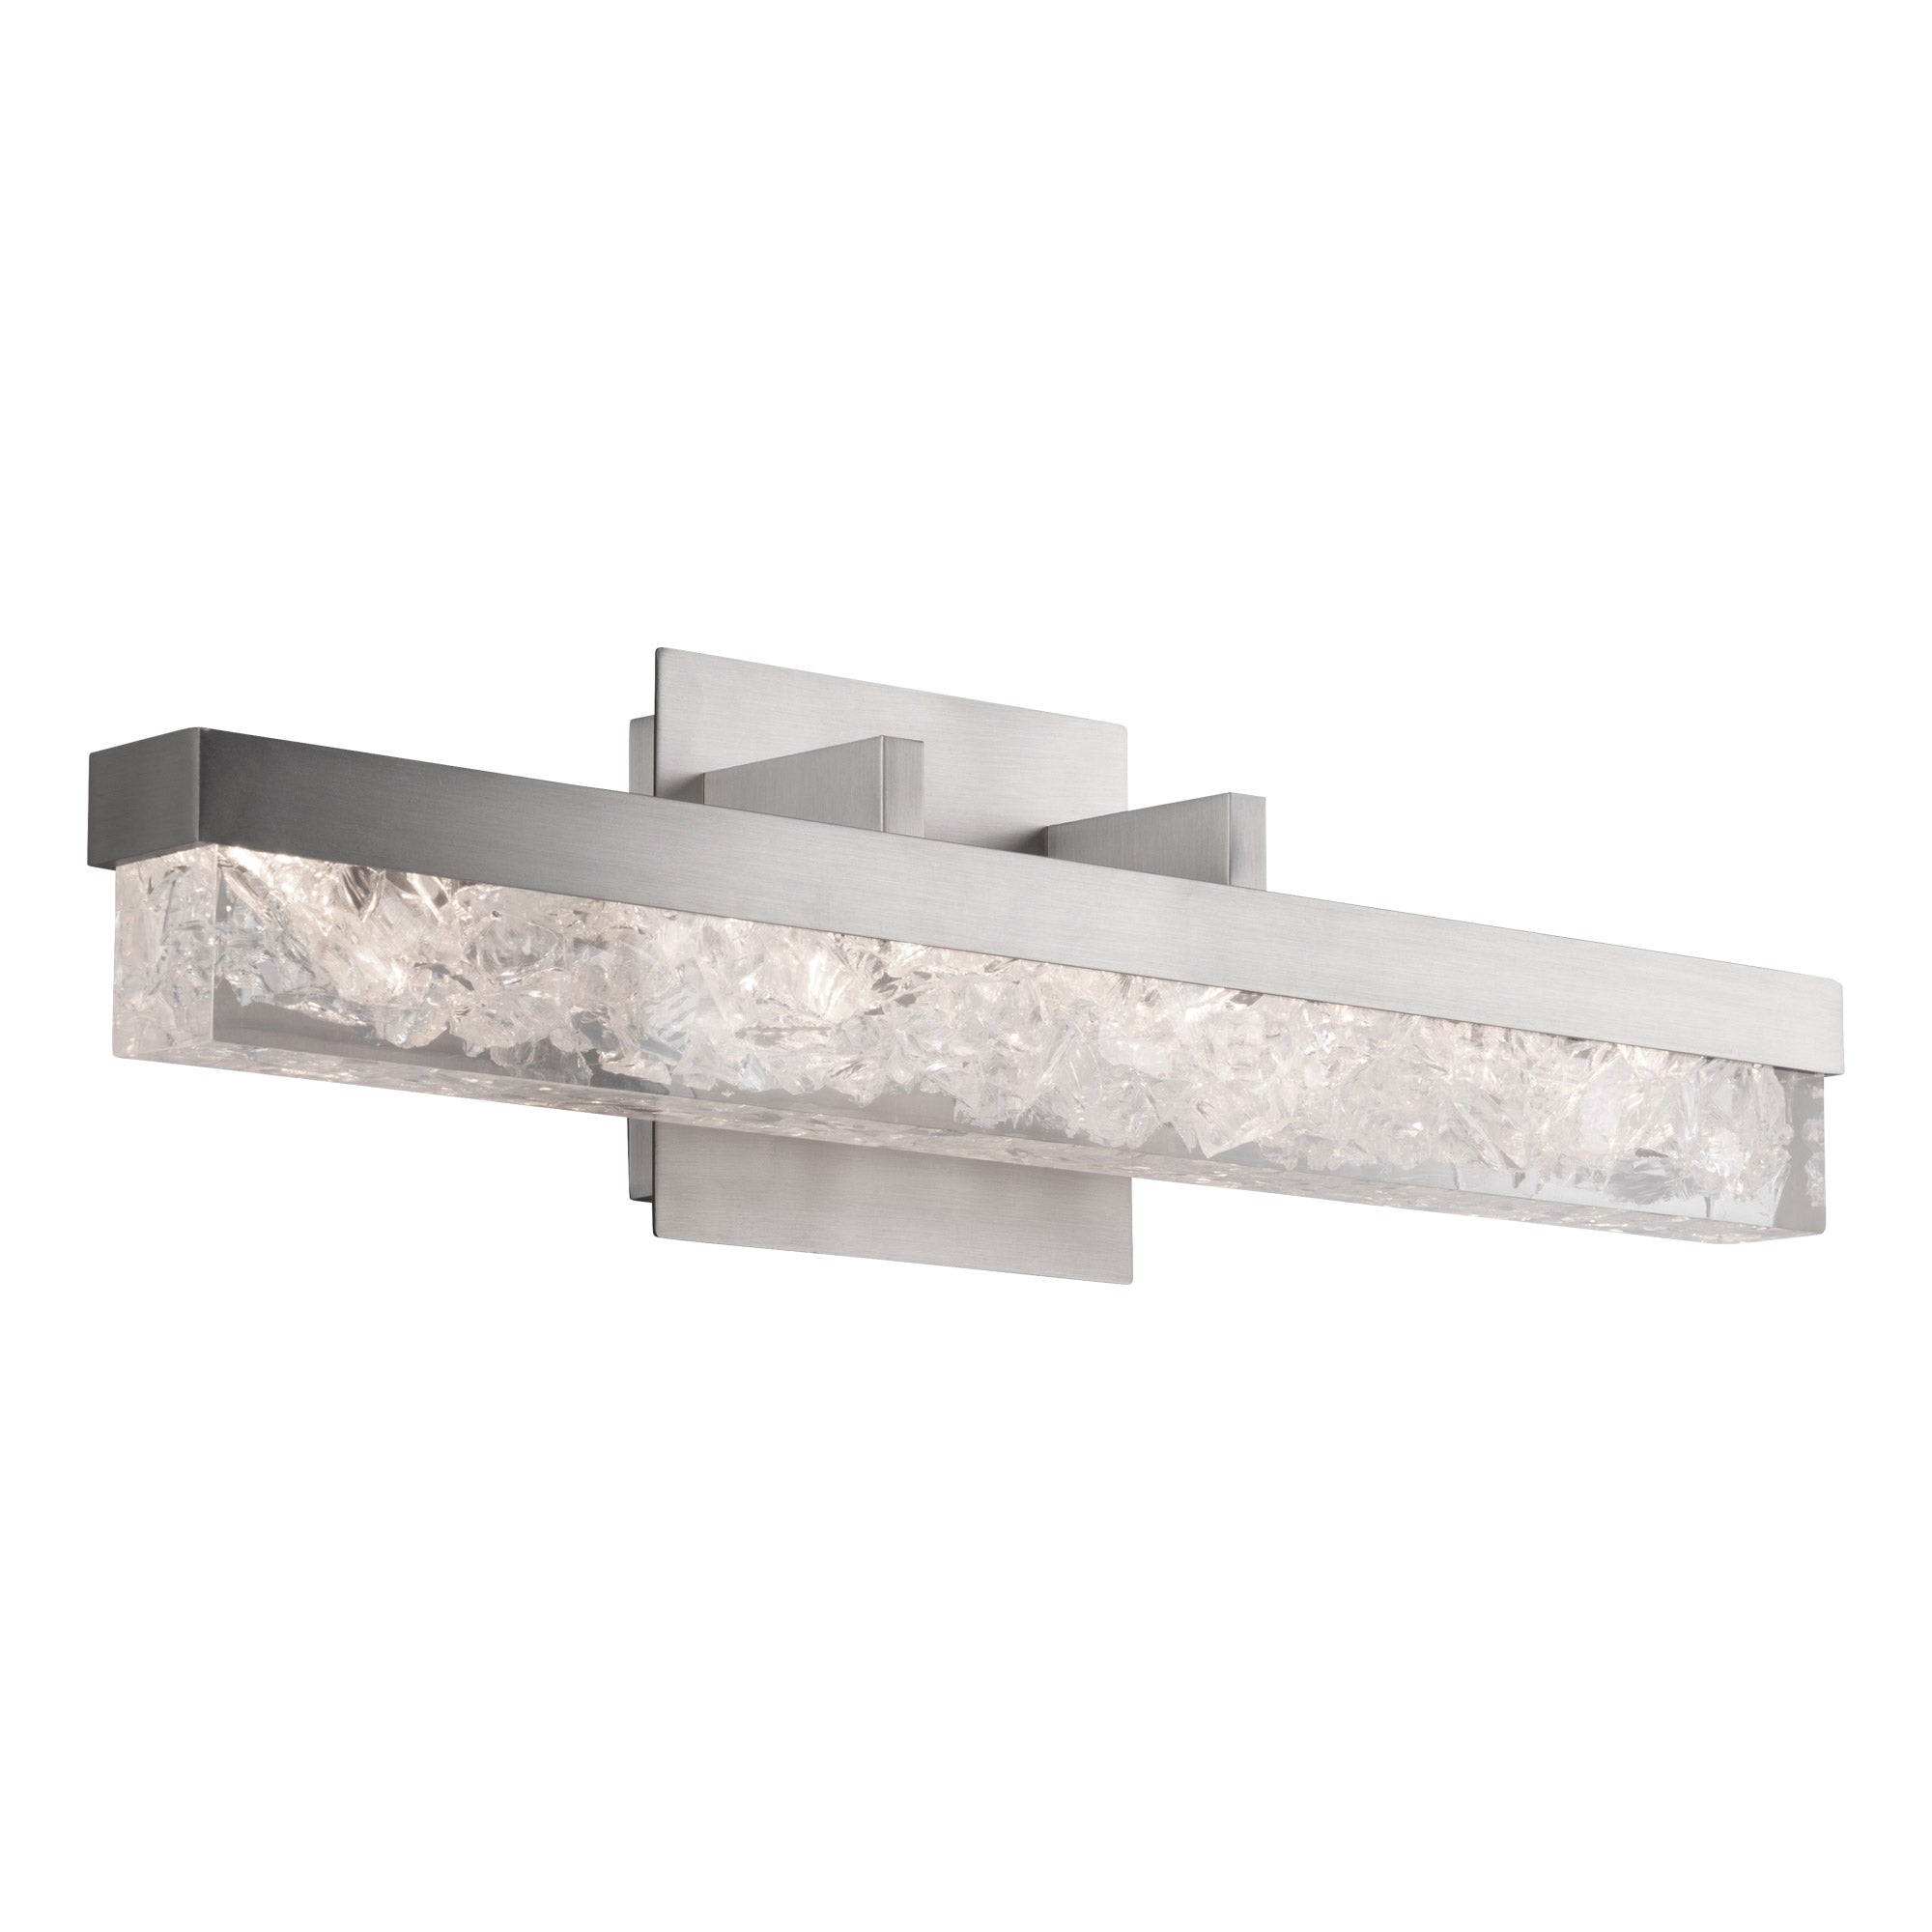 MINX Bathroom sconce Nickel INTEGRATED LED - WS-62021-BN | MODERN FORMS